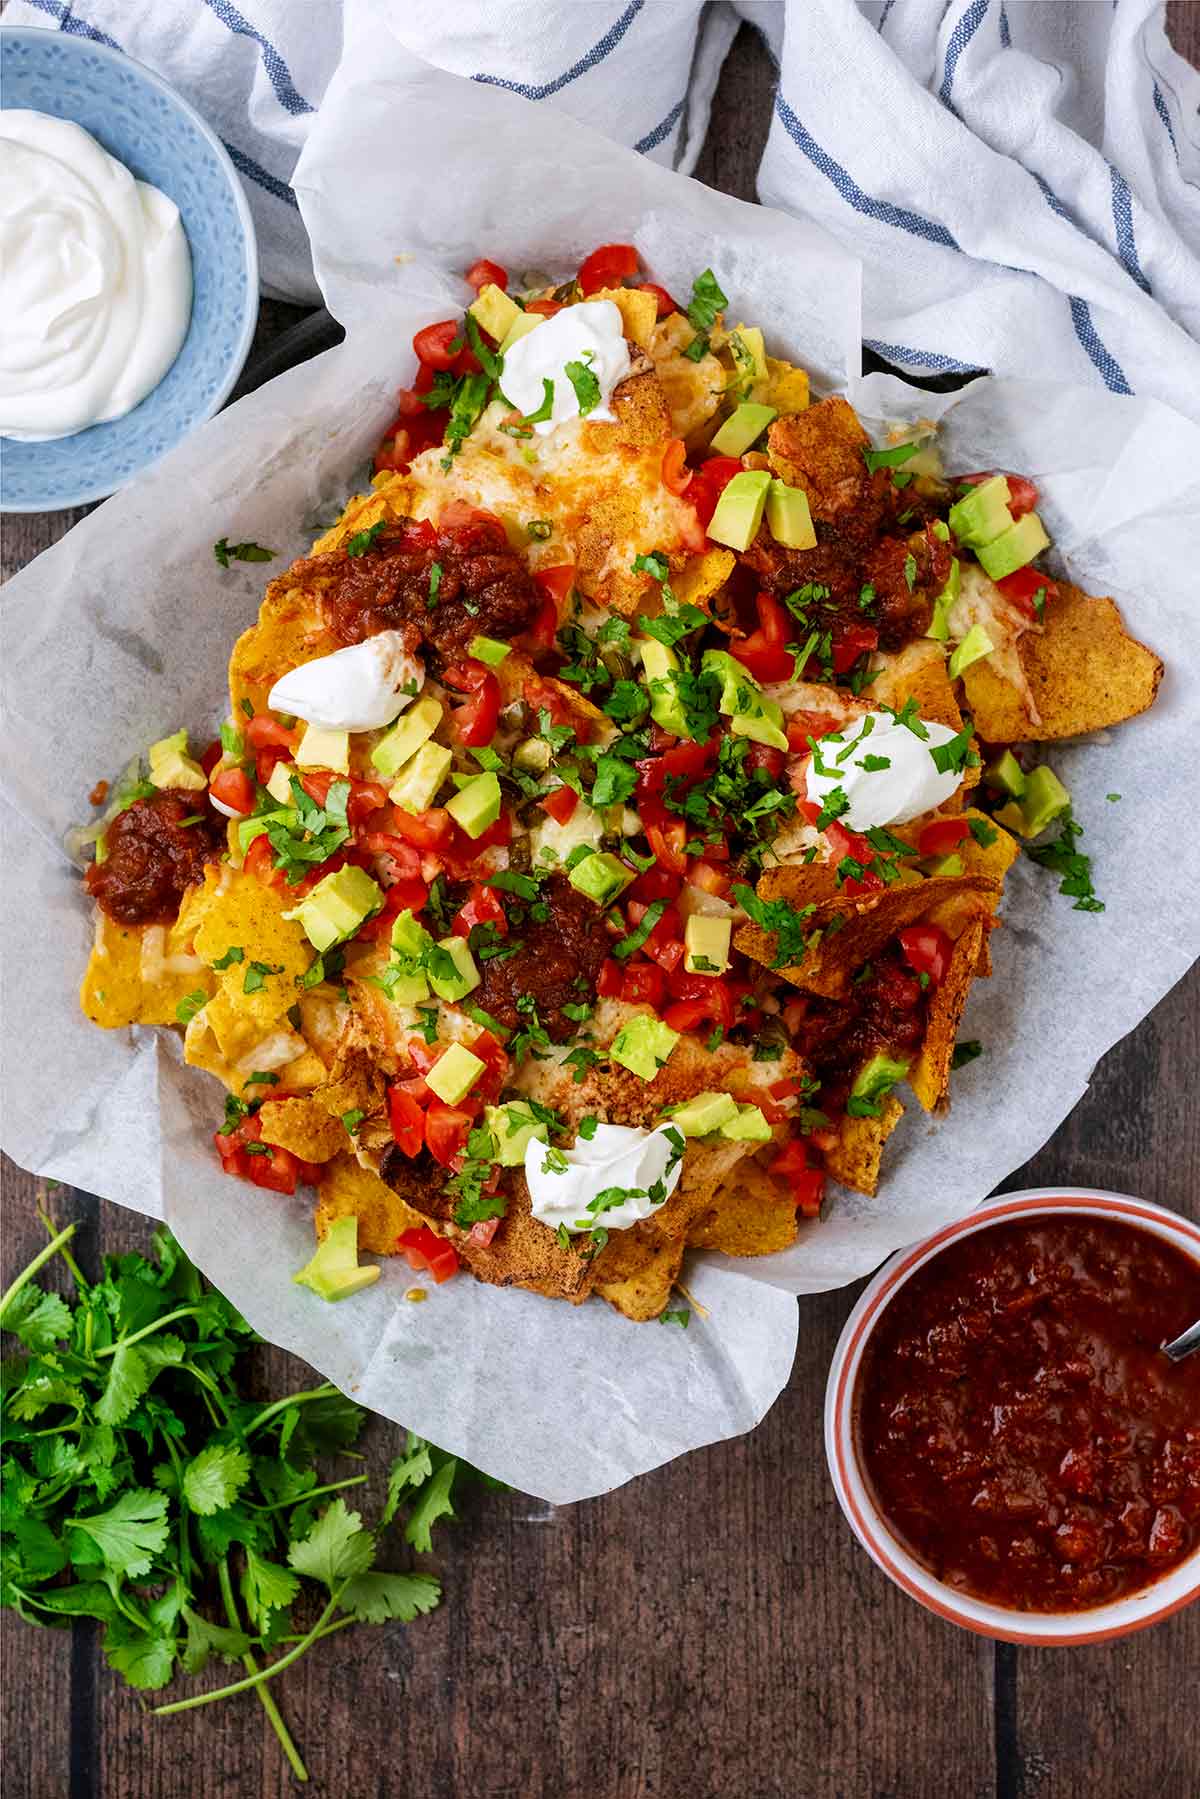 Nachos on a sheet of parchment paper next to a bunch of coriander and a bowl of salsa.